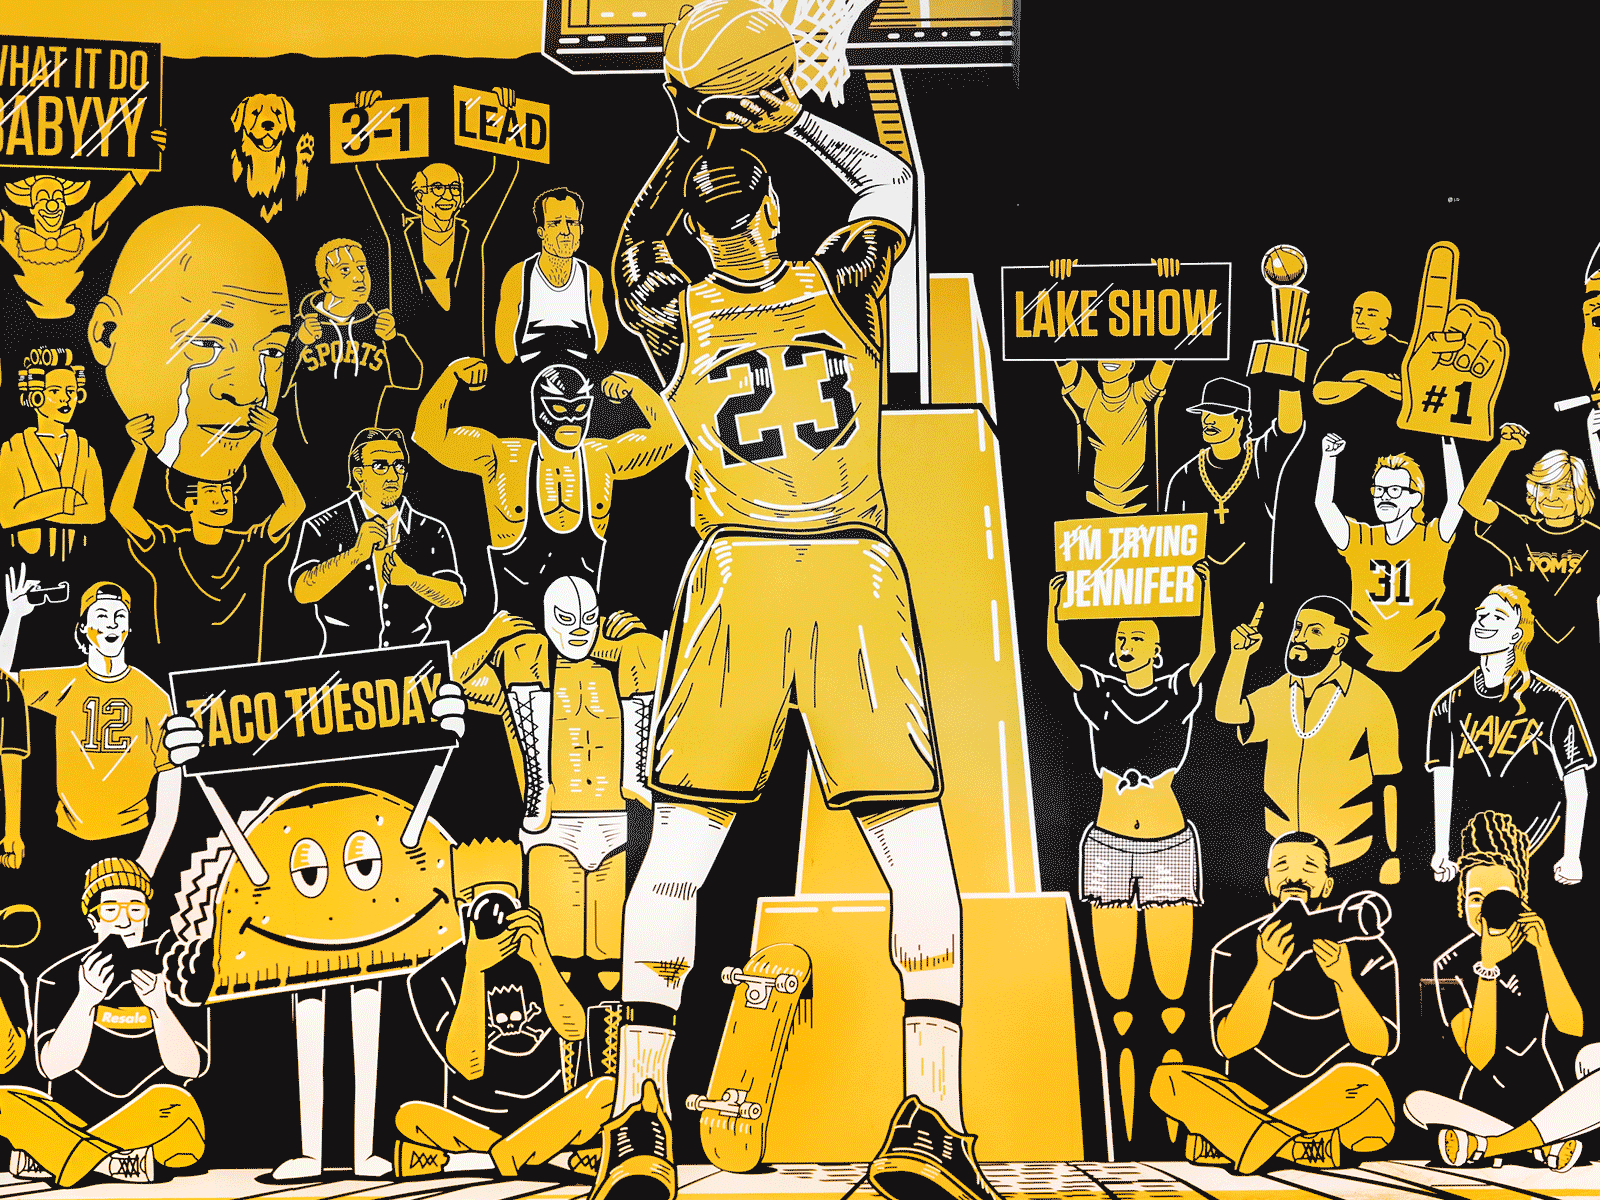 Los Angeles Lakers by Michael Irwin on Dribbble